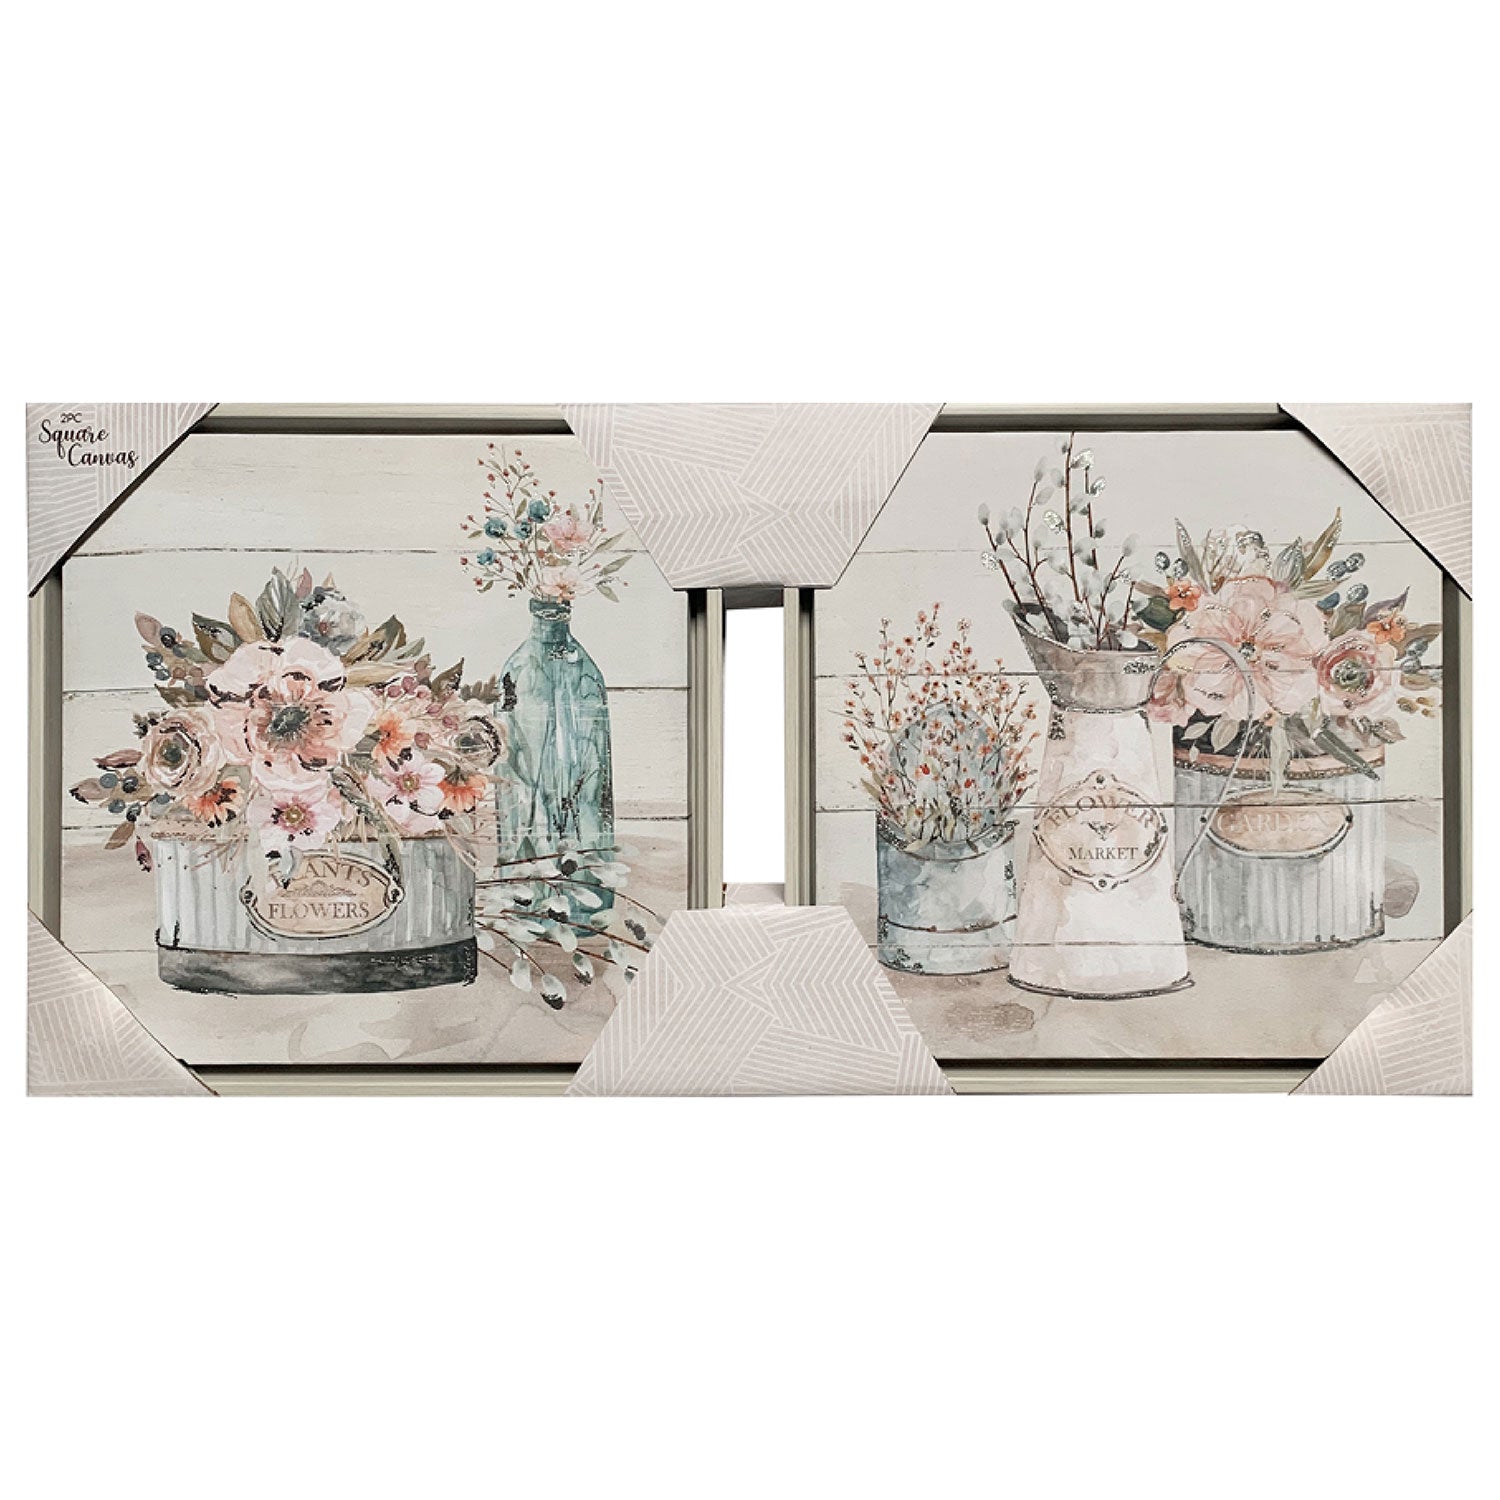 Premius 2 Piece Market Flowers Framed Canvas Wall Art Set, 12x12 Inches